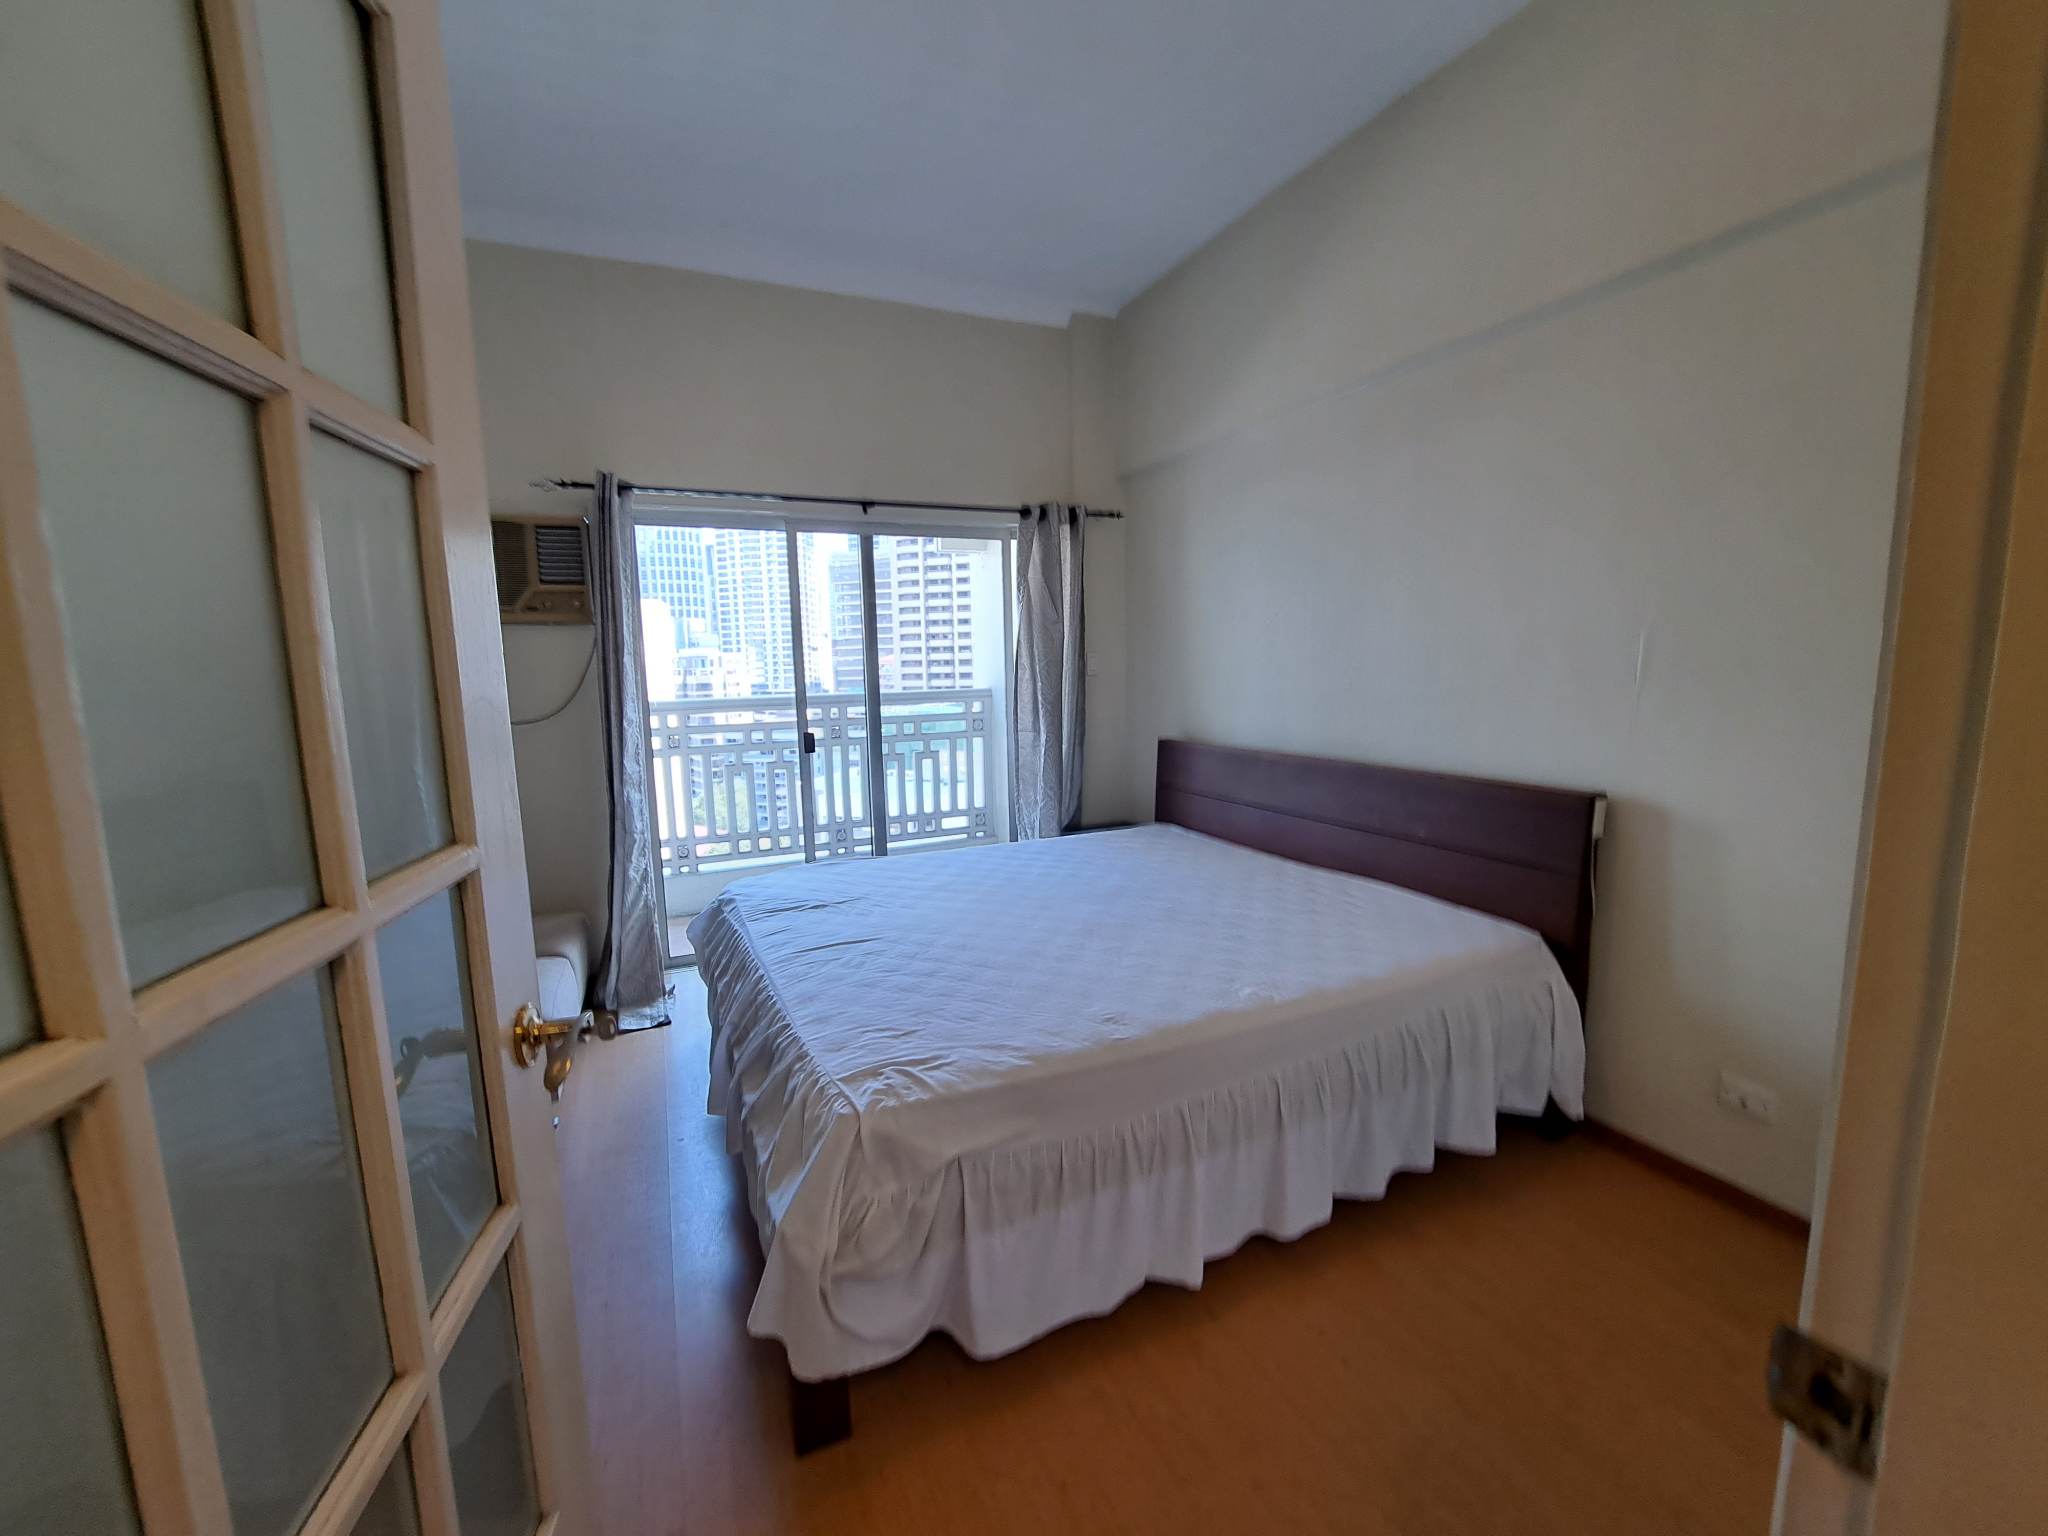 1 bedroom at Elizabeth Place , Salcedo Village, Makati. One bedroom near Makati Business District CBD with balcony that is fully furnished for long term yearly lease